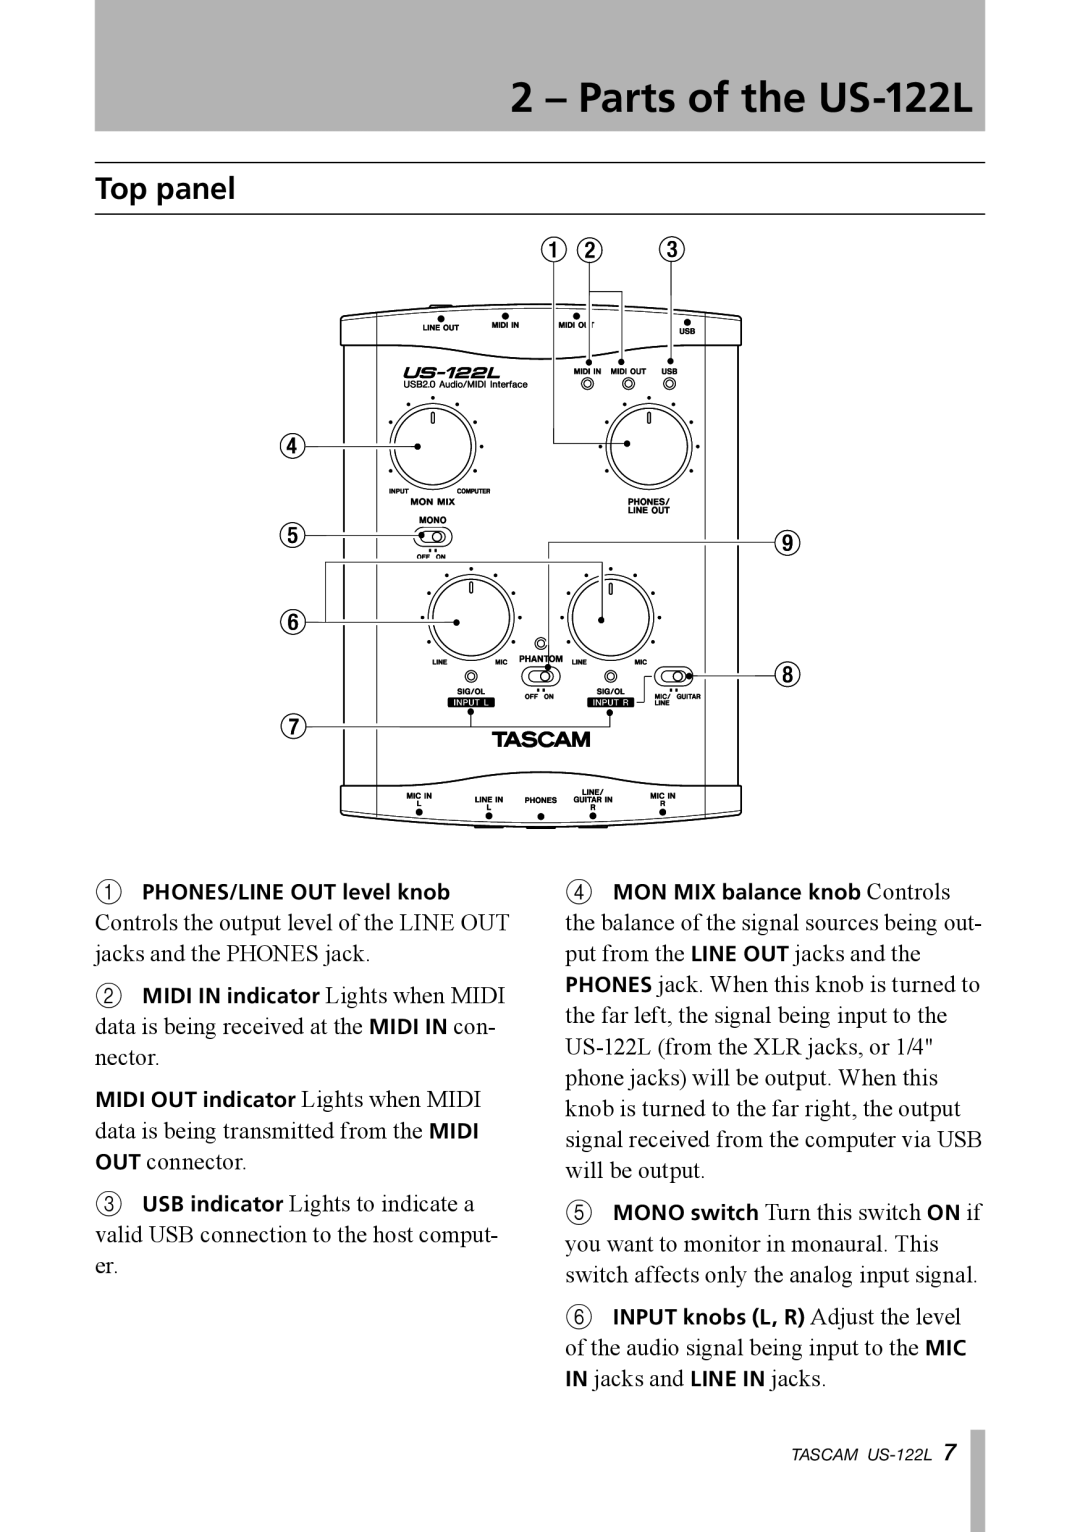 Tascam owner manual Parts of the US-122L, Top panel 